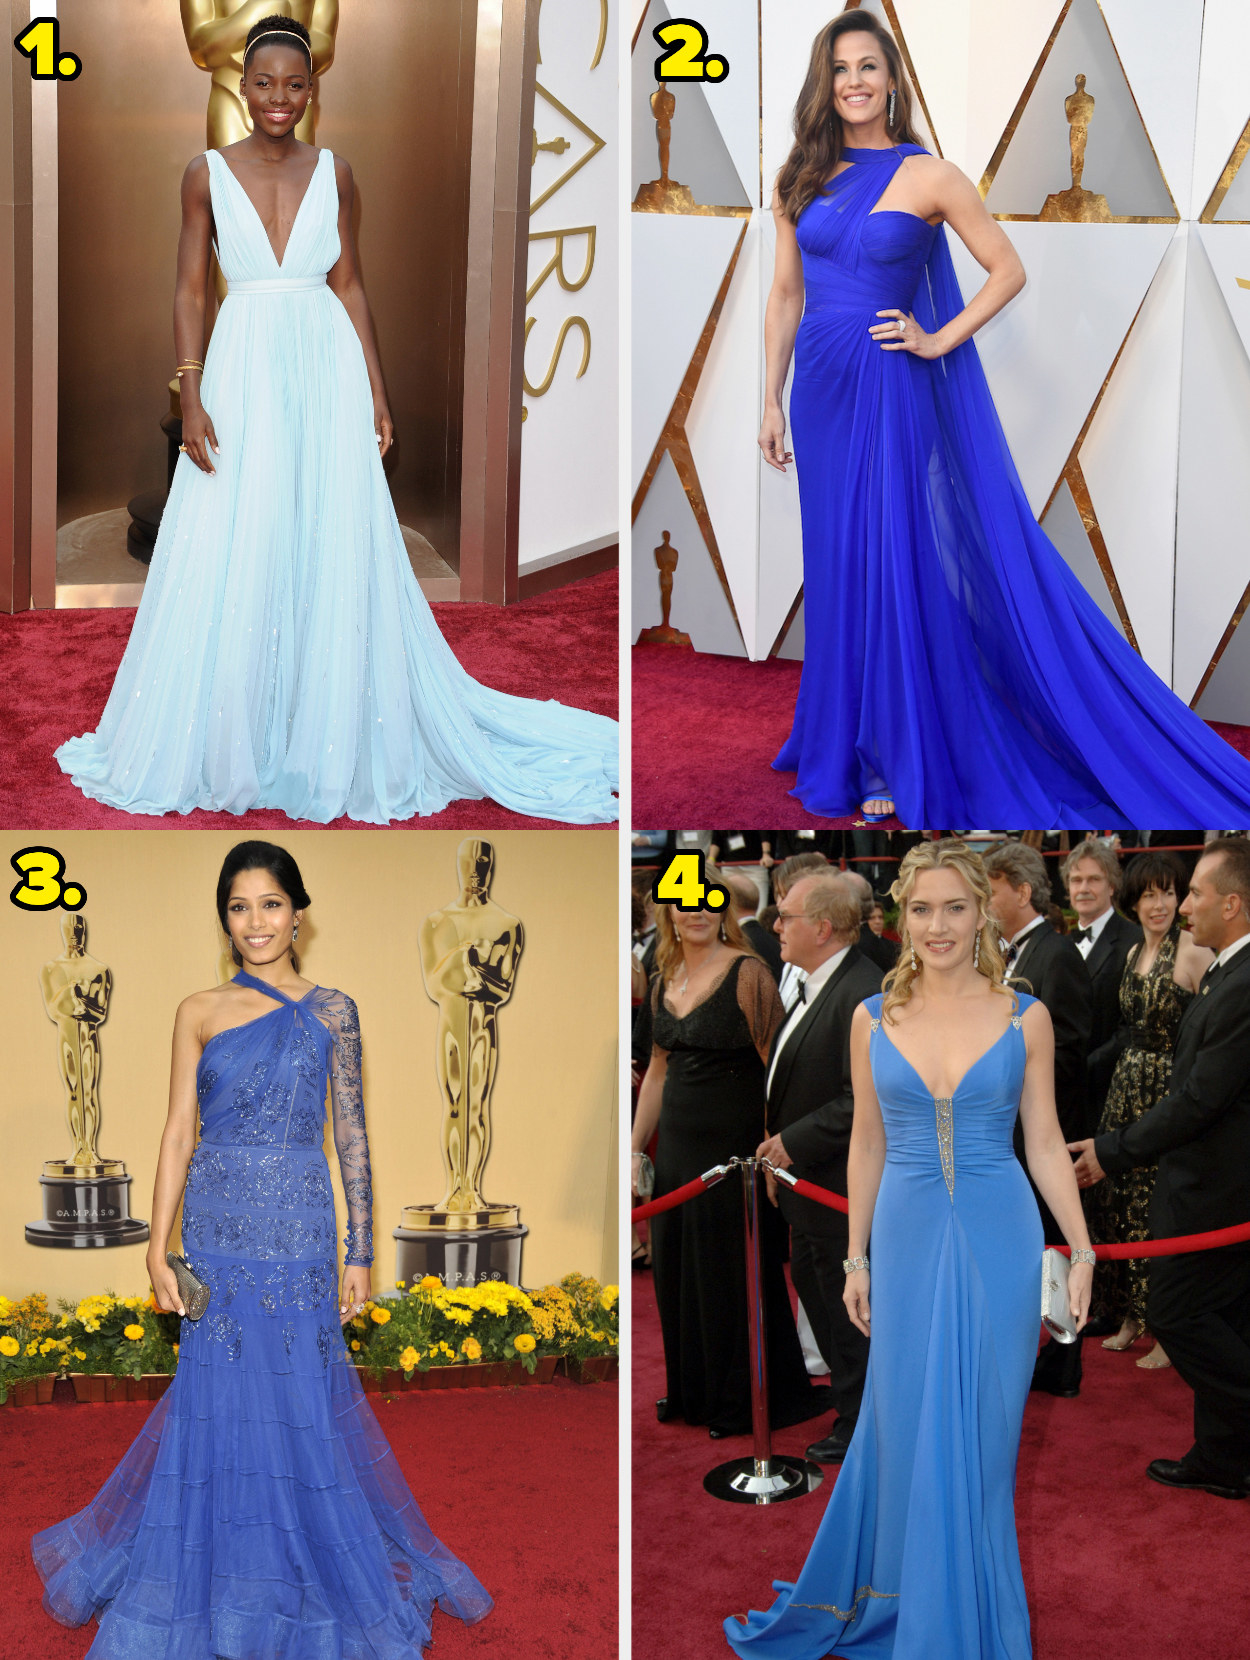 1. Lupita Nyong&#x27;o wears a deep v-neck flowing gown. 2. Jennifer Garner wears a one shoulder gown. 3. Freida Pinto wears a one shoulder gown with a long sleeve and metallic detailing. 4. Kate Winslet wears a sleeveless gown with silver detailing